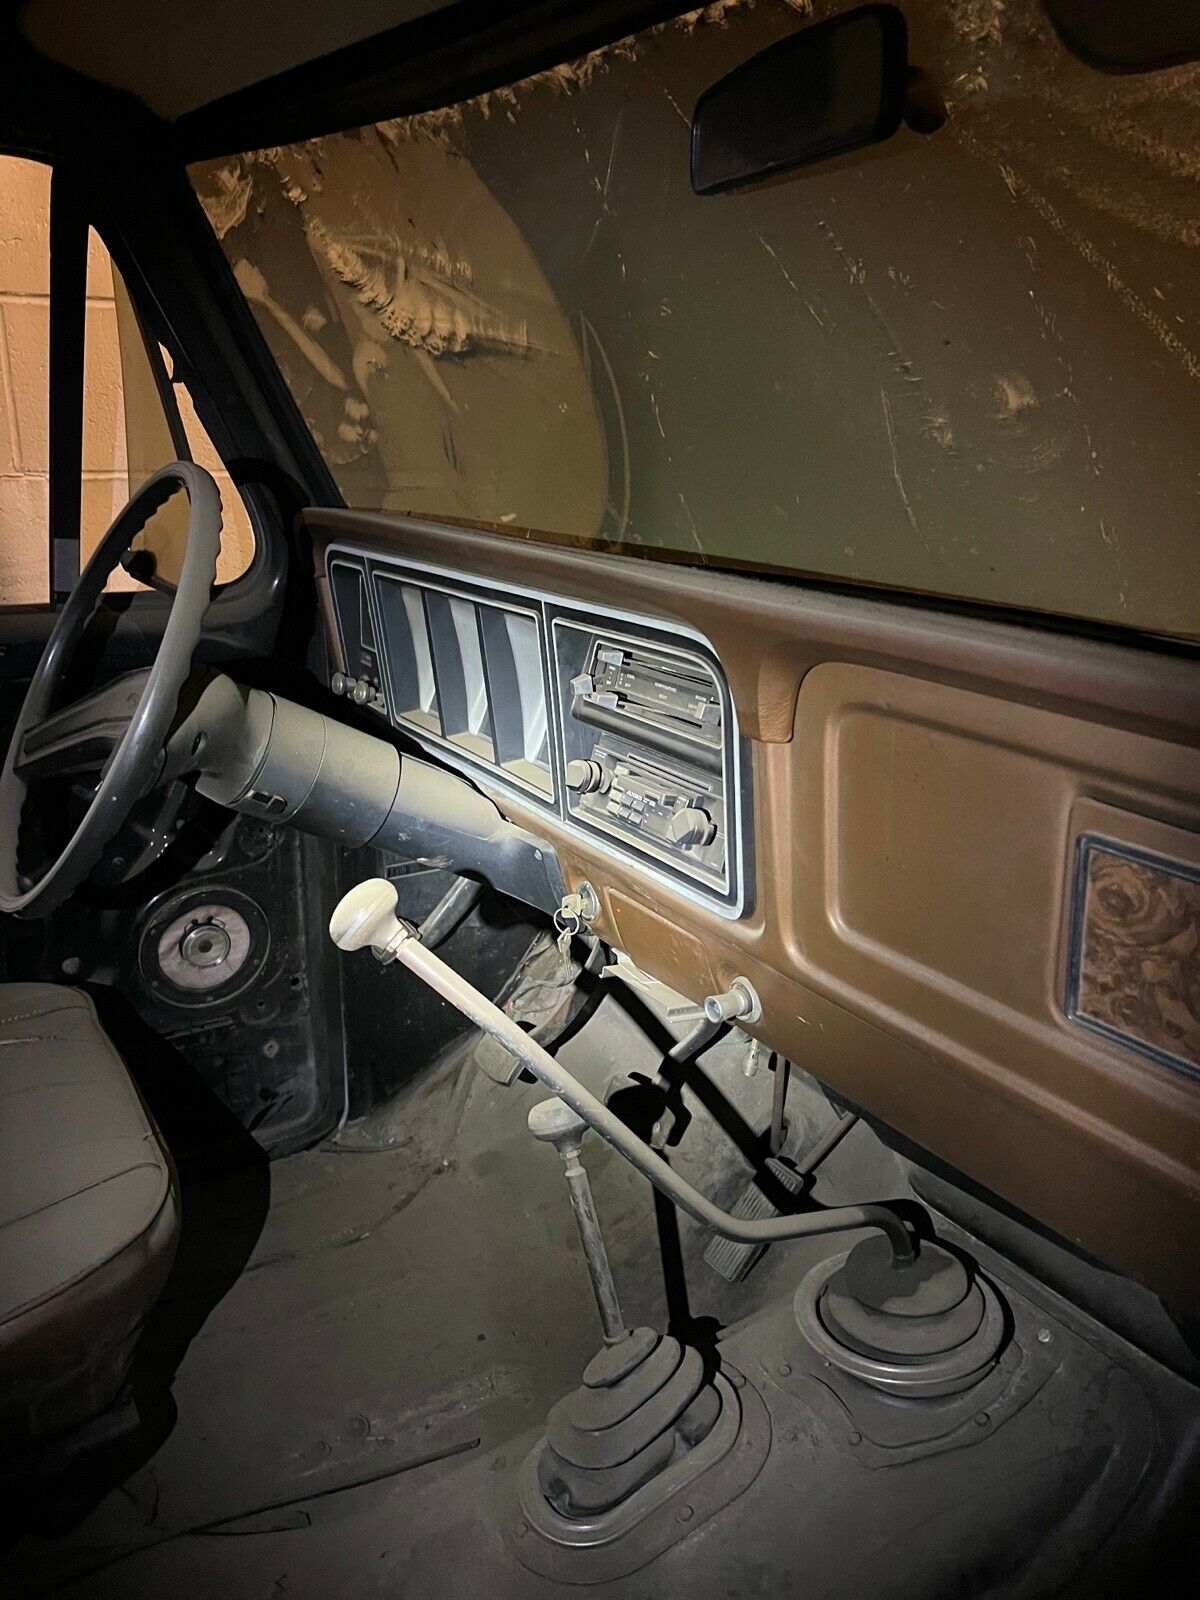 1978 ford bronco parked for 30 years looks dusty and dirty and ridiculously cool 5